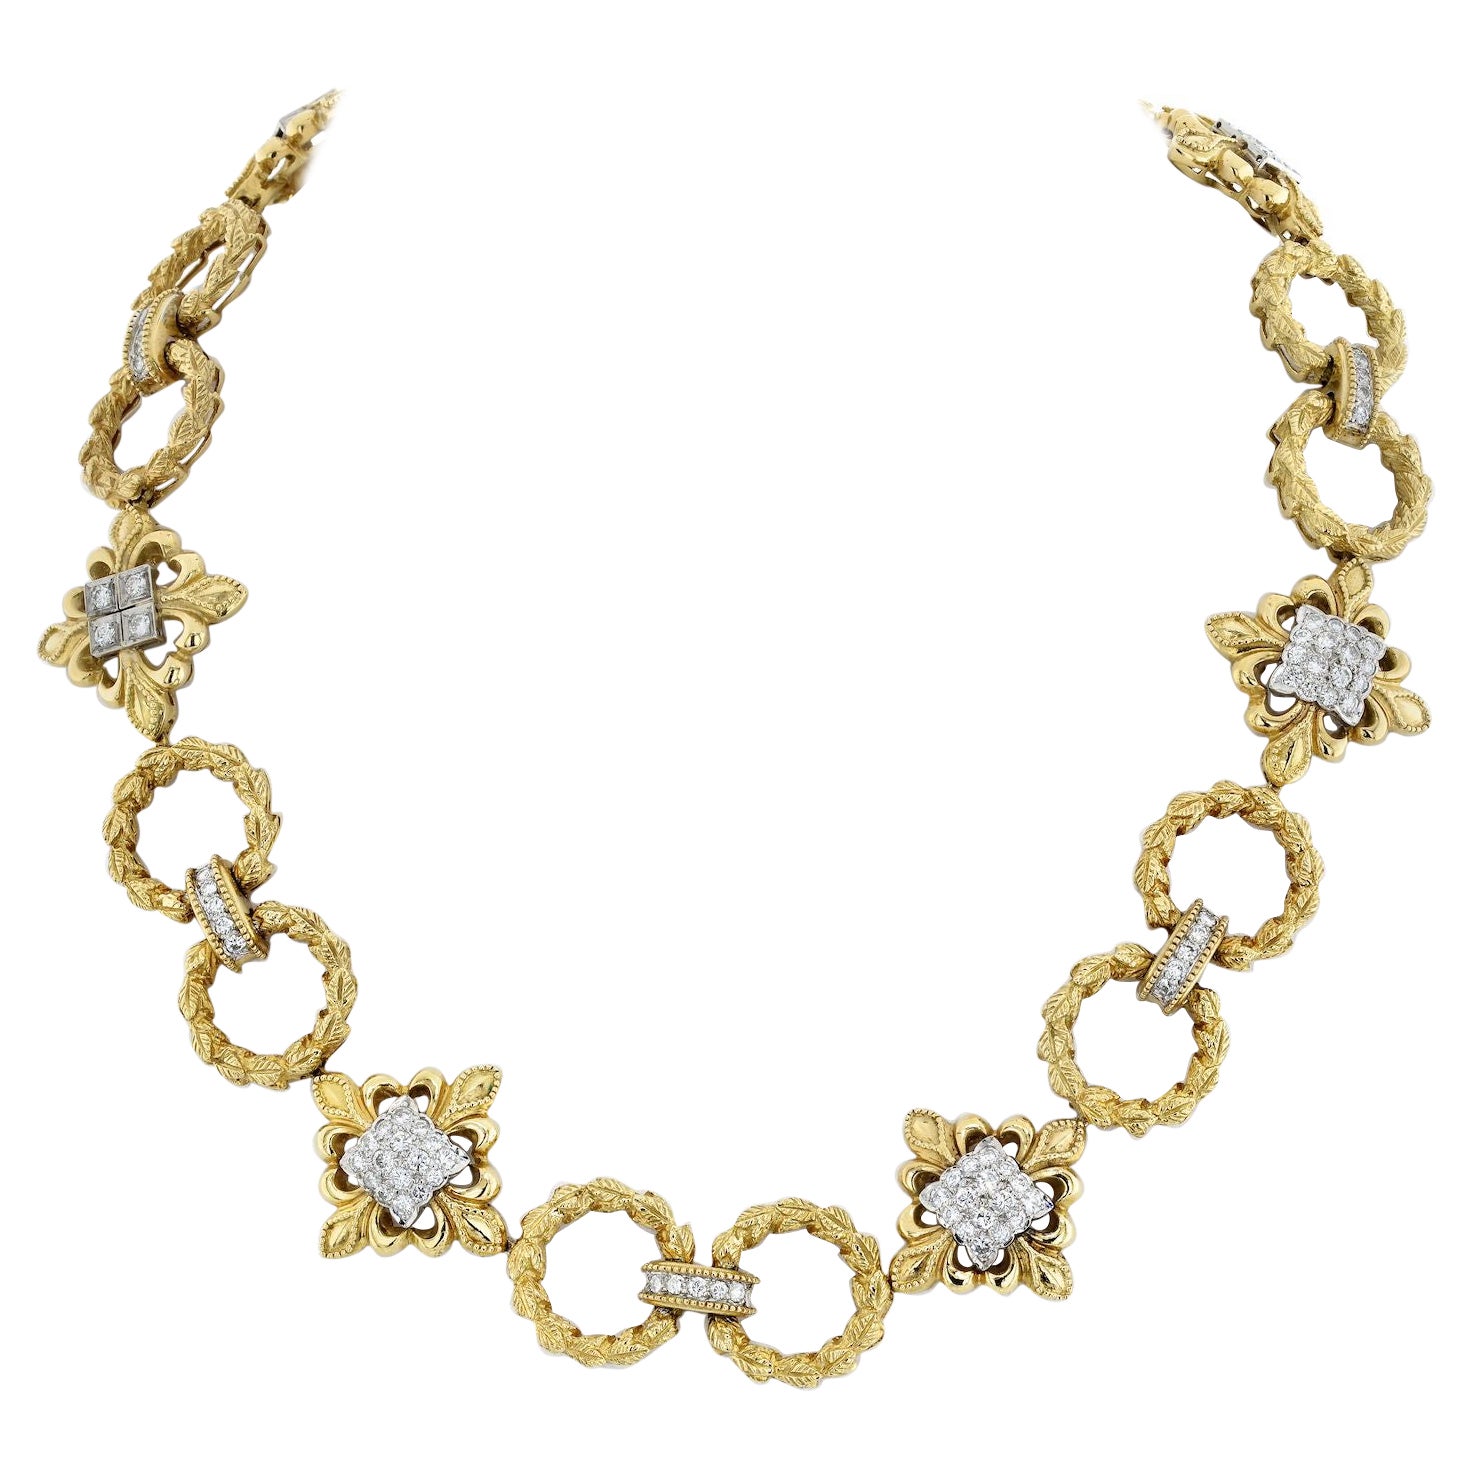 Wander France 18K Yellow Gold Open Link Diamond Necklace